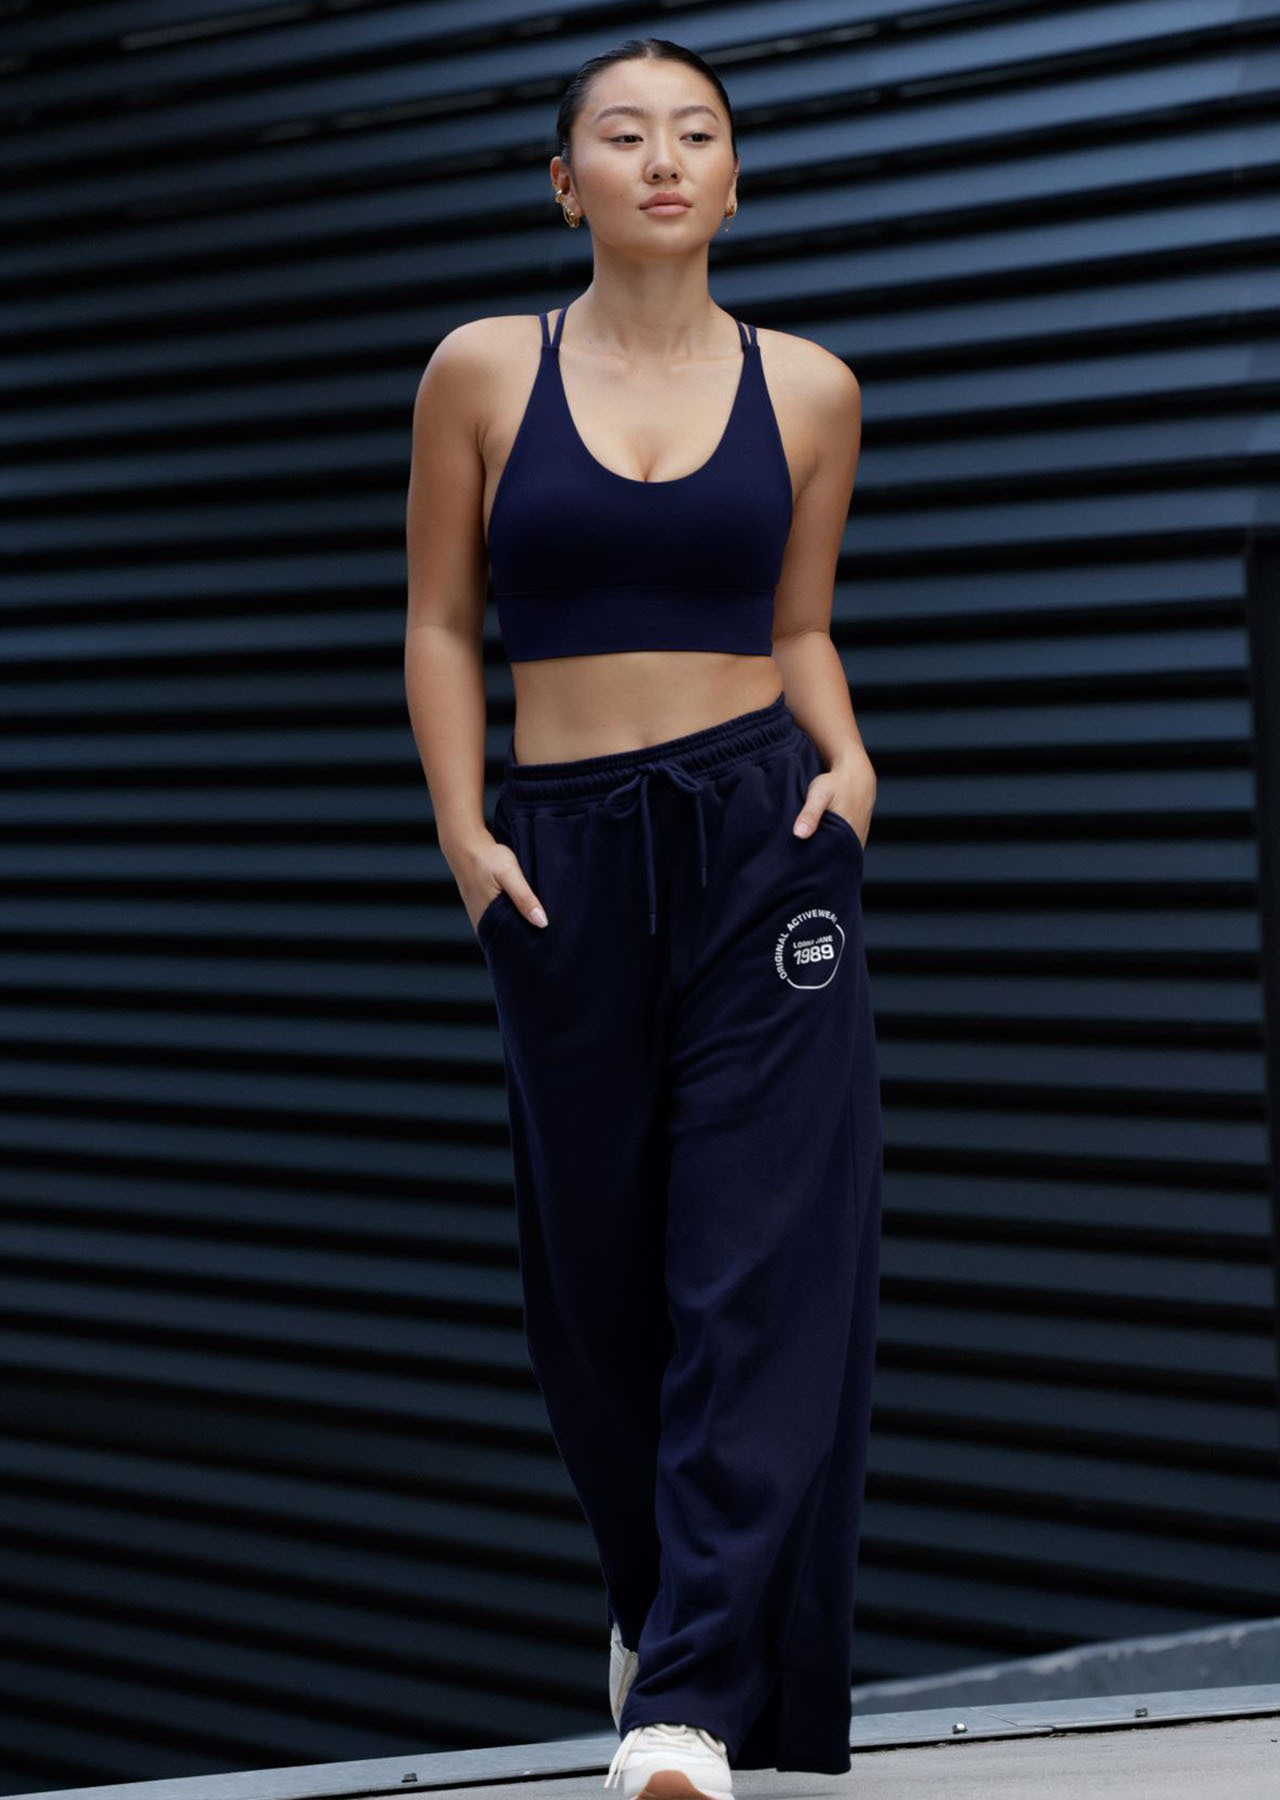 How to style the Lorna Jane pants, #fyp #unlockmylikes #fypviral #fy